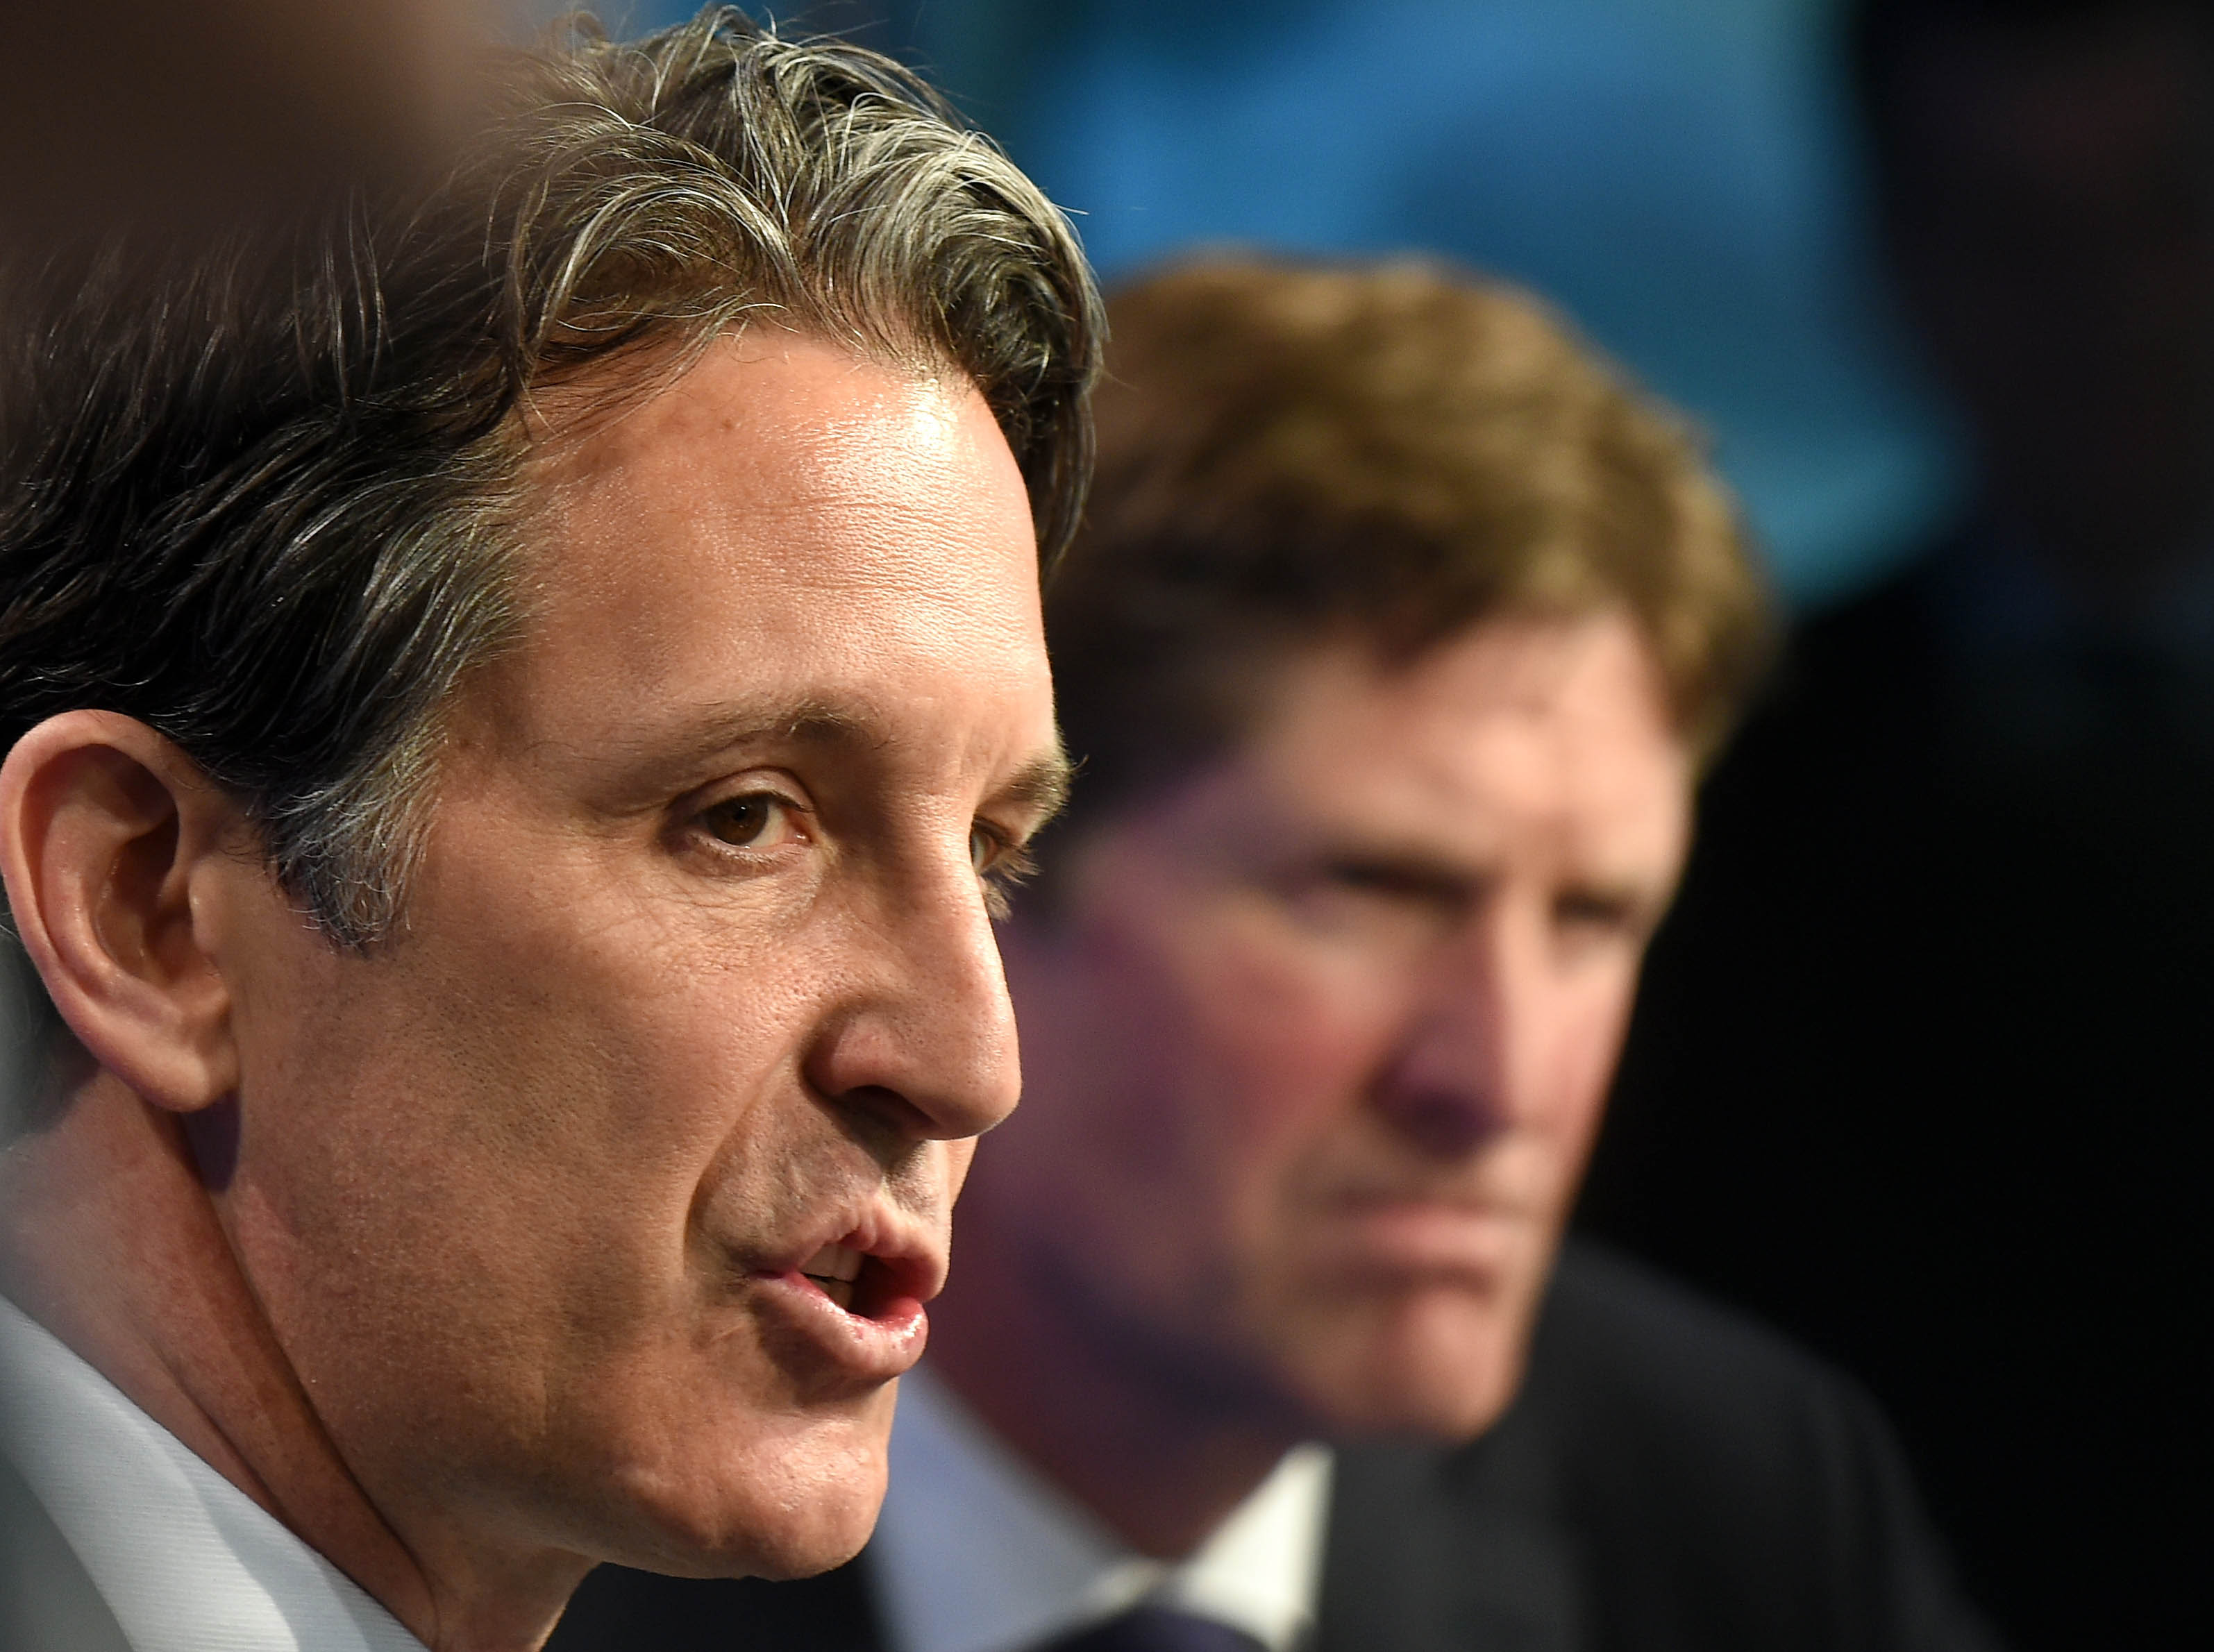 NHL: Toronto Maple Leafs Press Conference